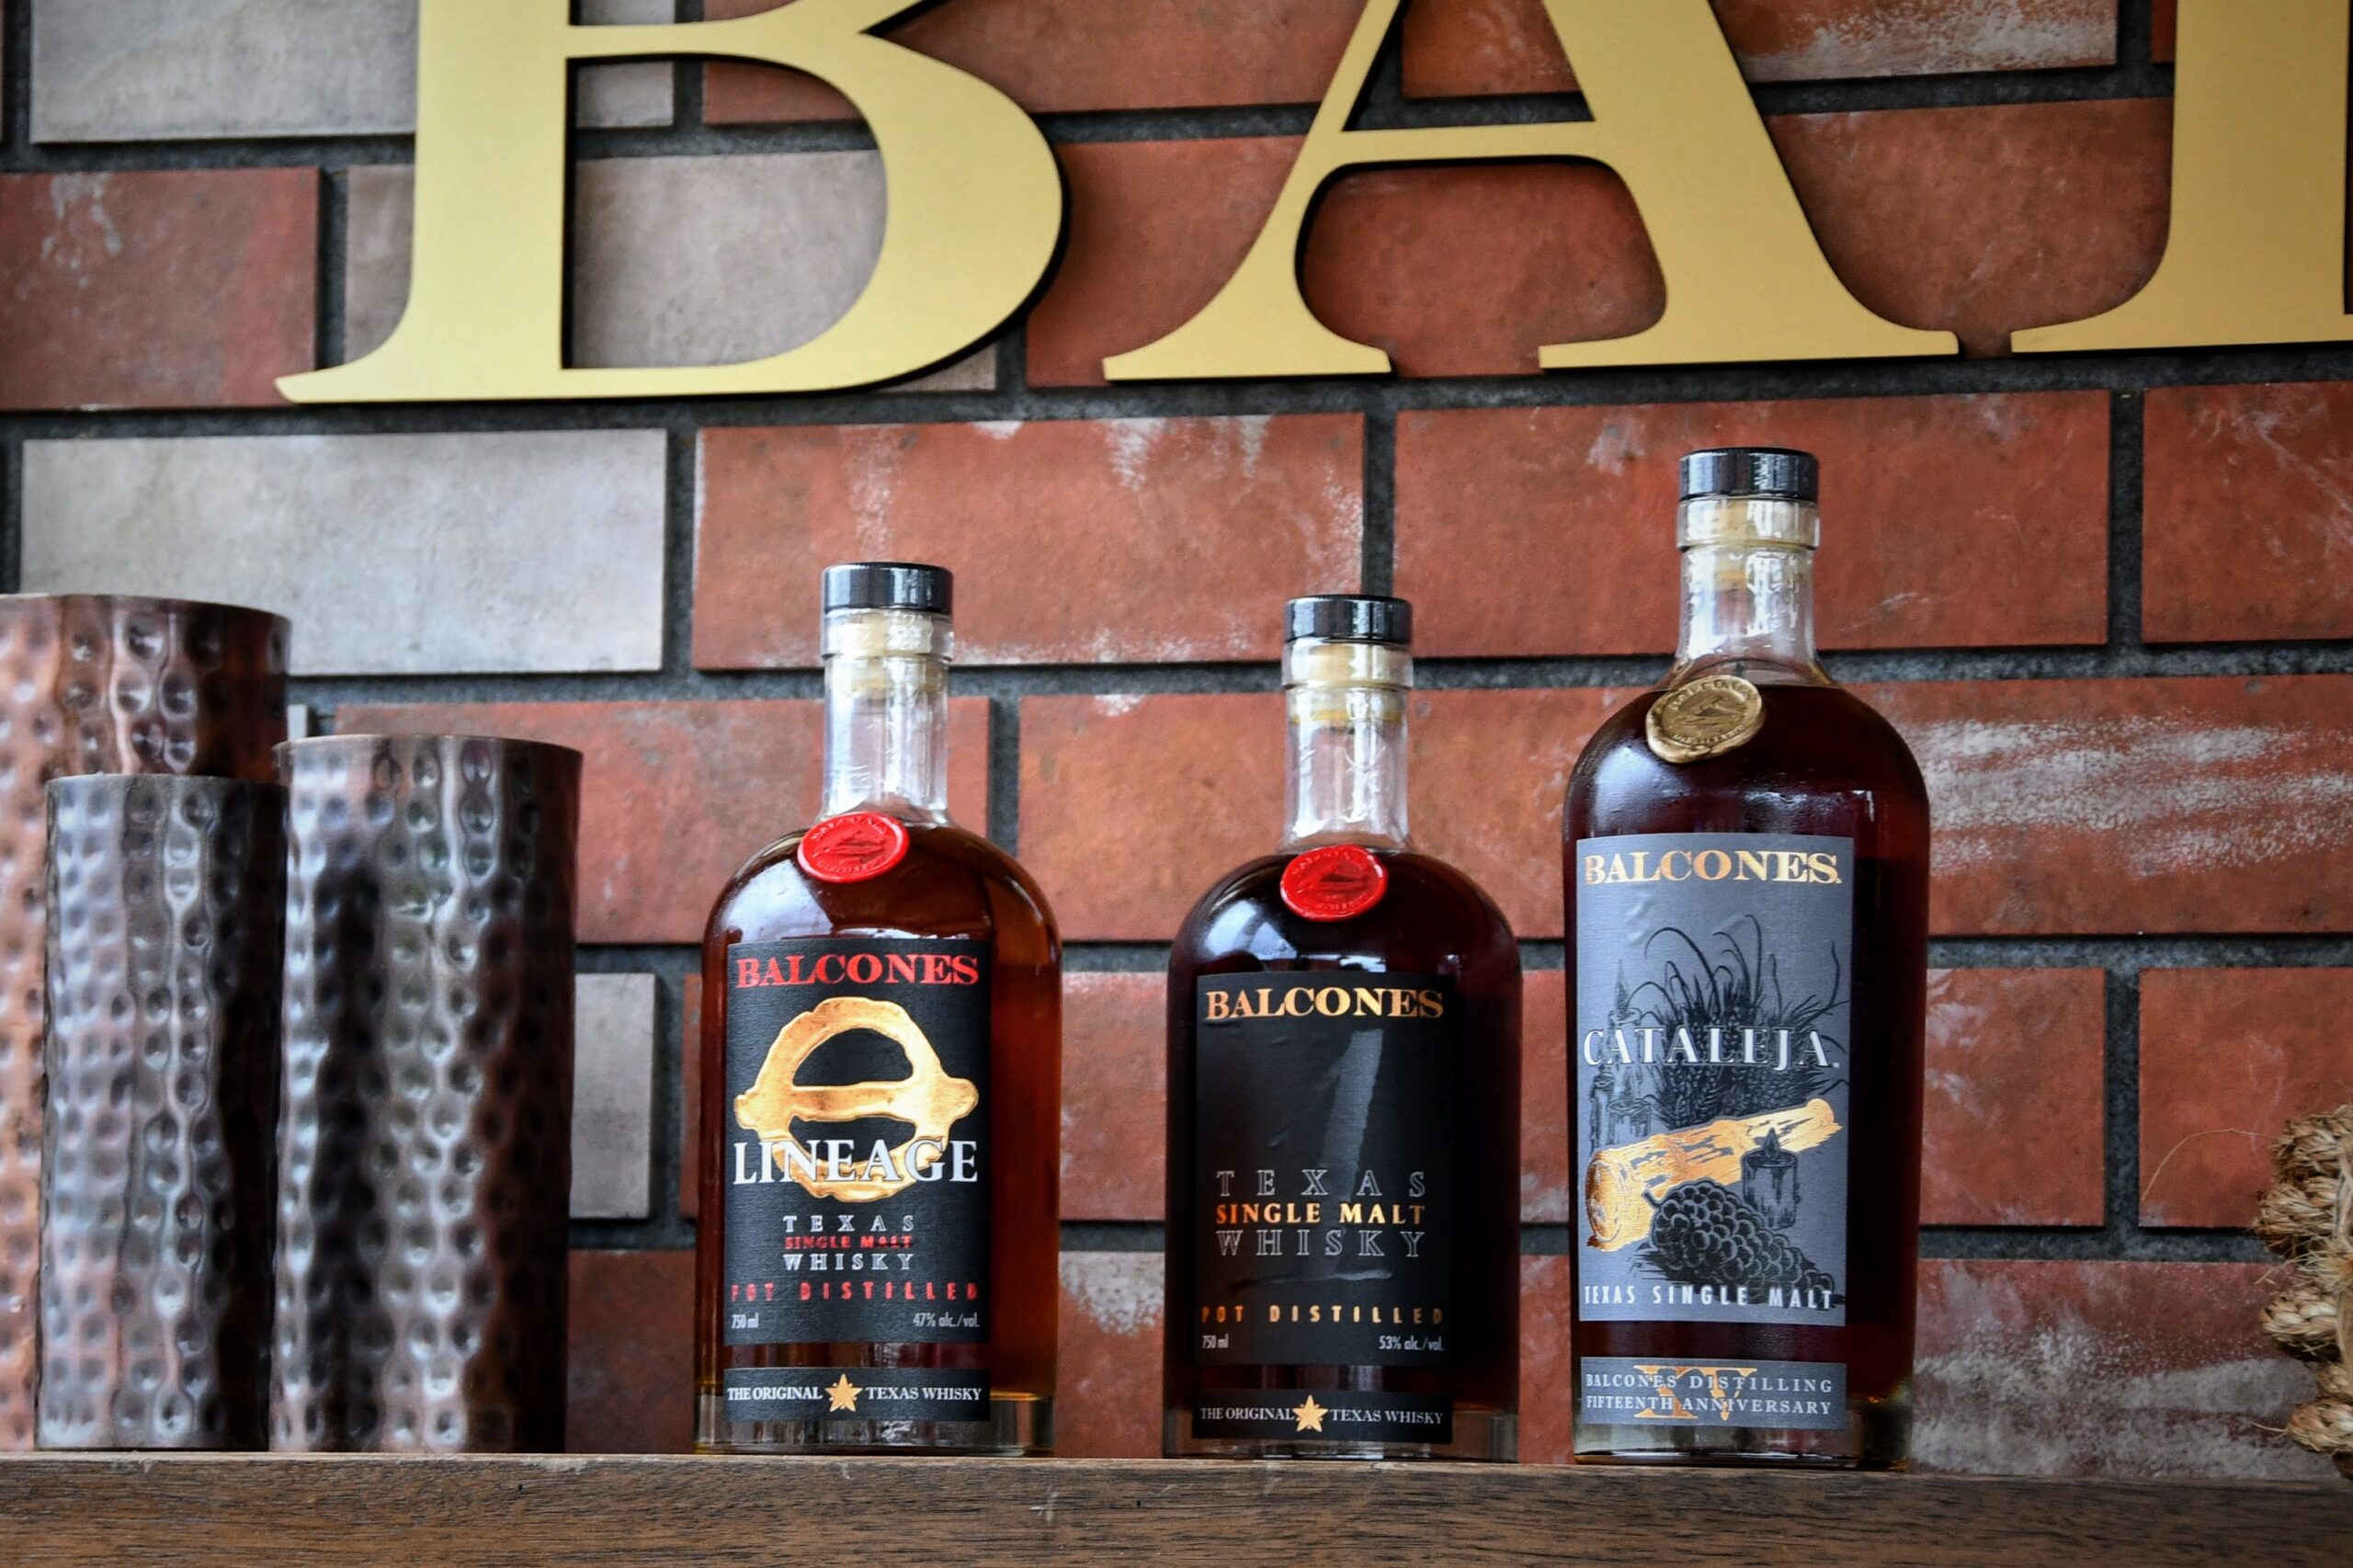 Texas’ Balcones Awarded “Craft Producer of the Year” by Whisky Magazine